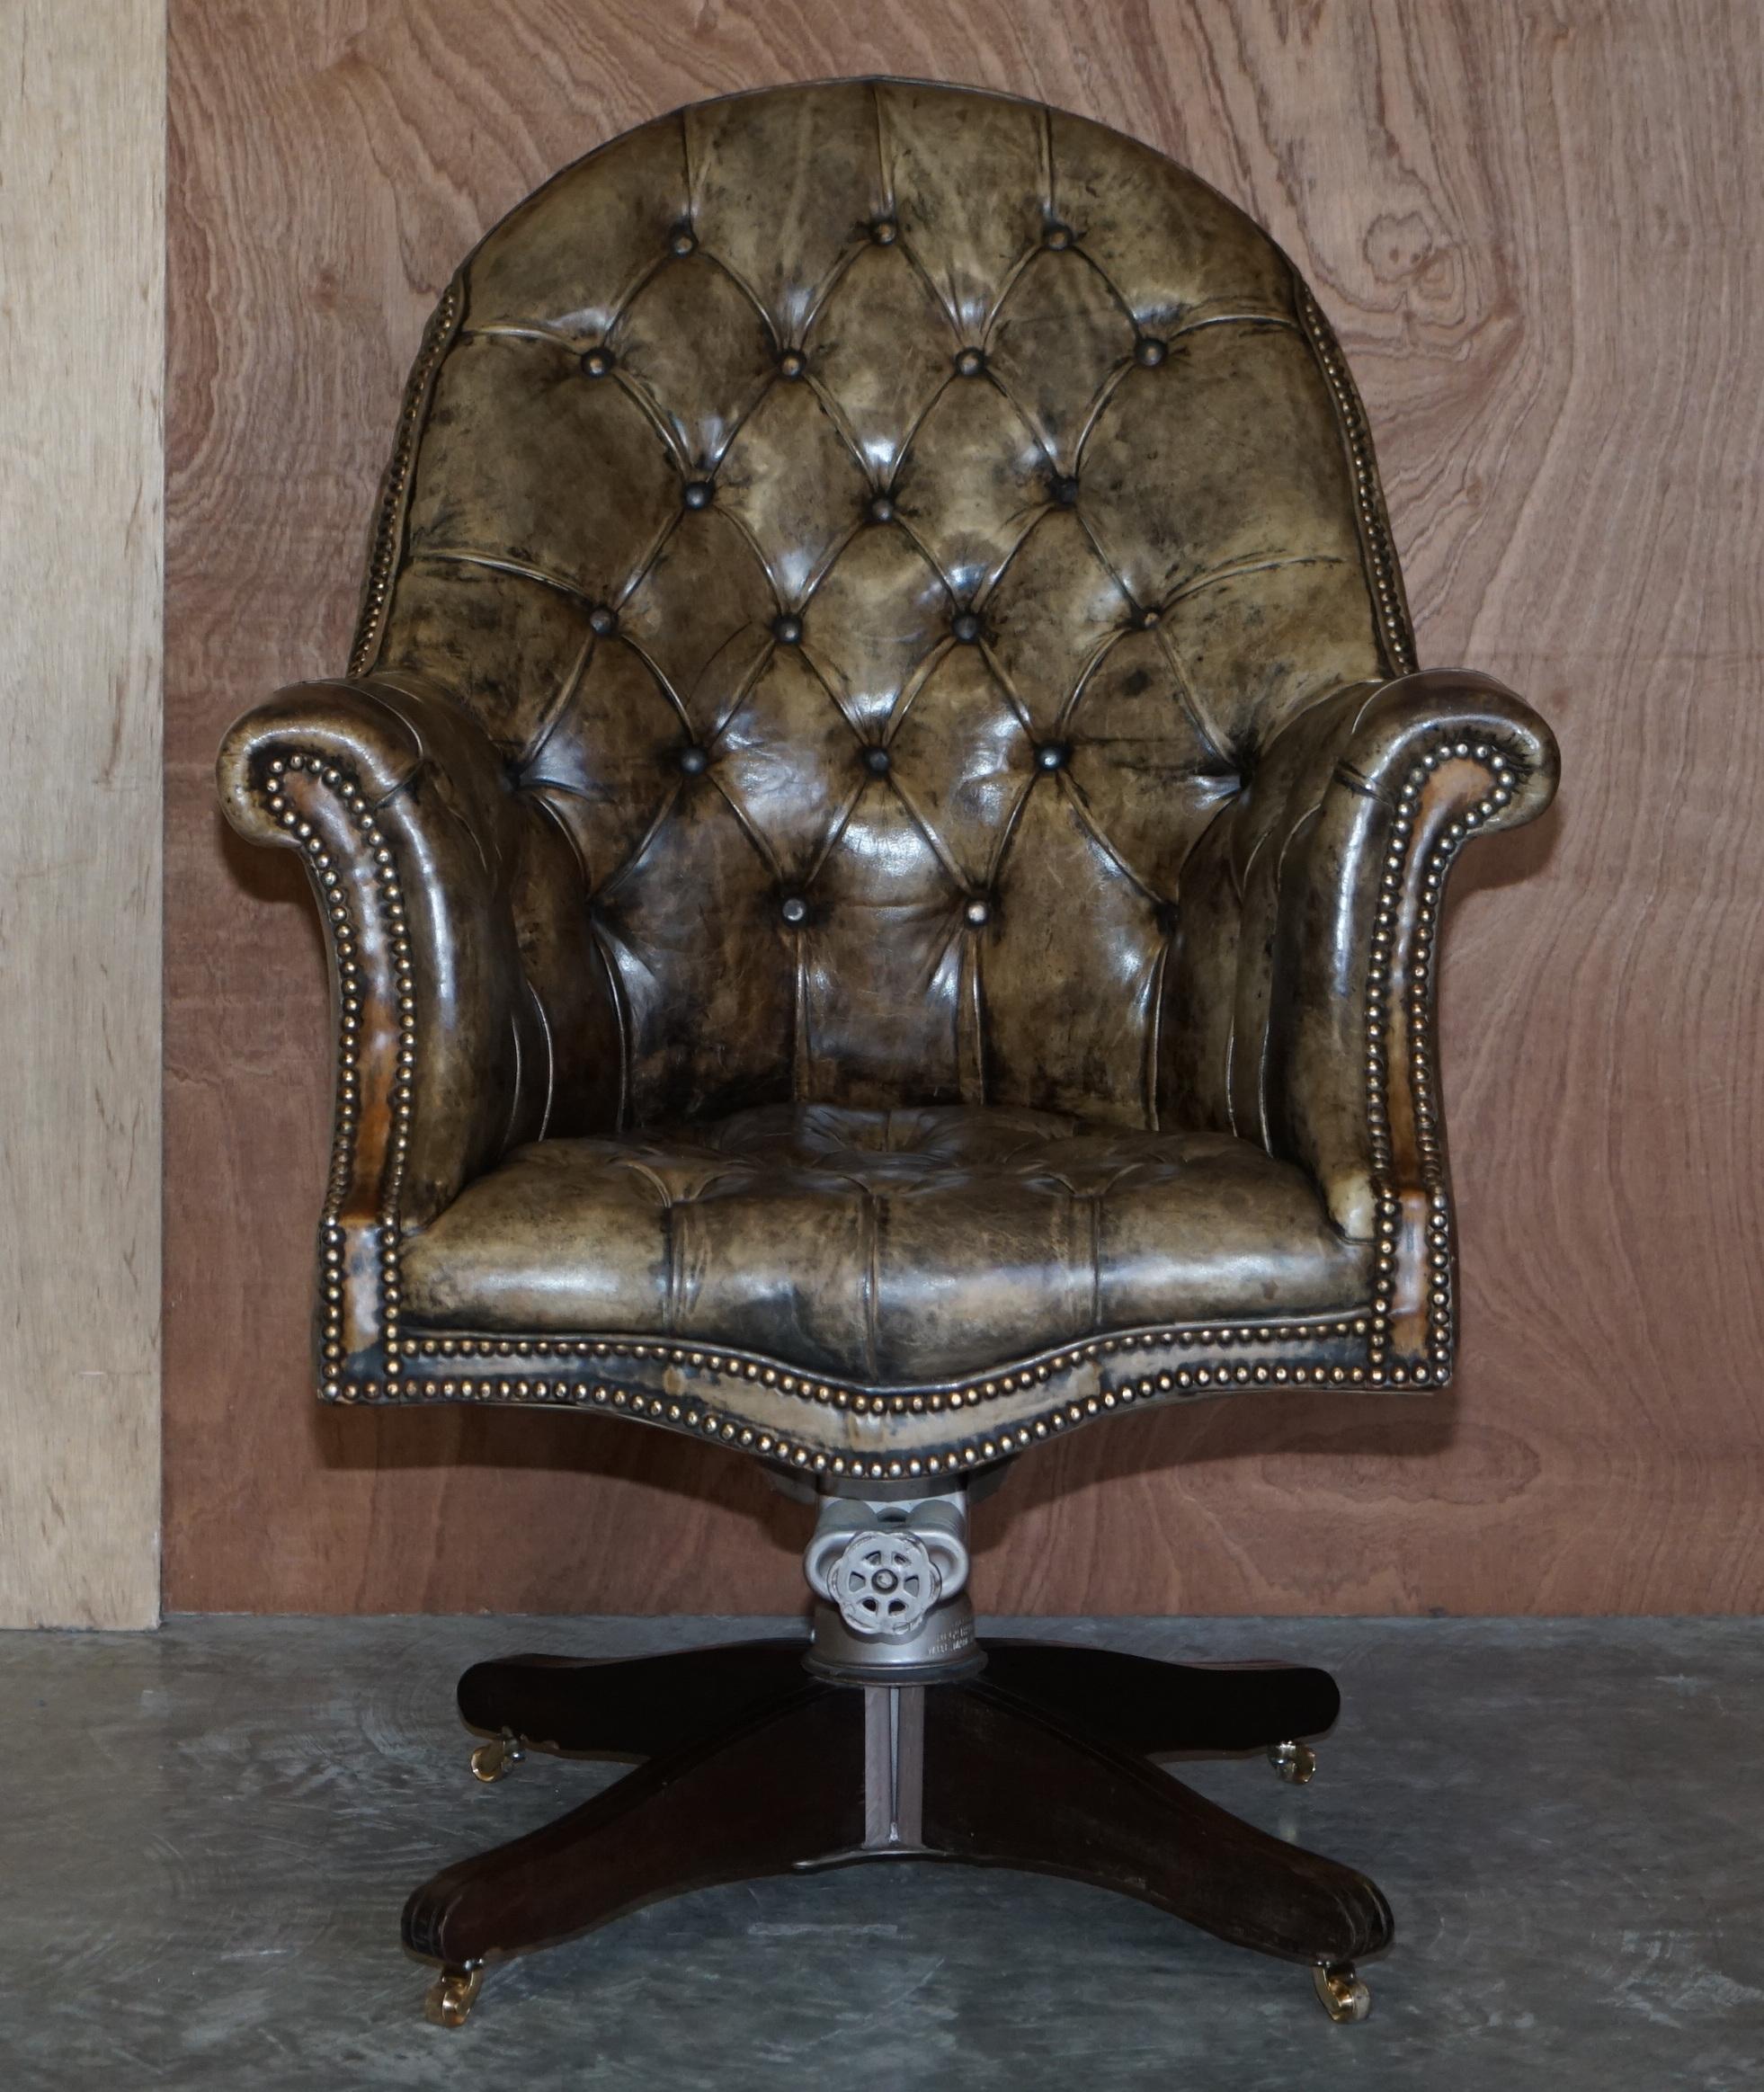 We are delighted to offer for sale this stunning original finish, aged leather Godfather Directors armchair with original Hillcrest base circa 1920’s

This is a very fine and well made English circa 1920’s Directors chair, it has a coil sprung